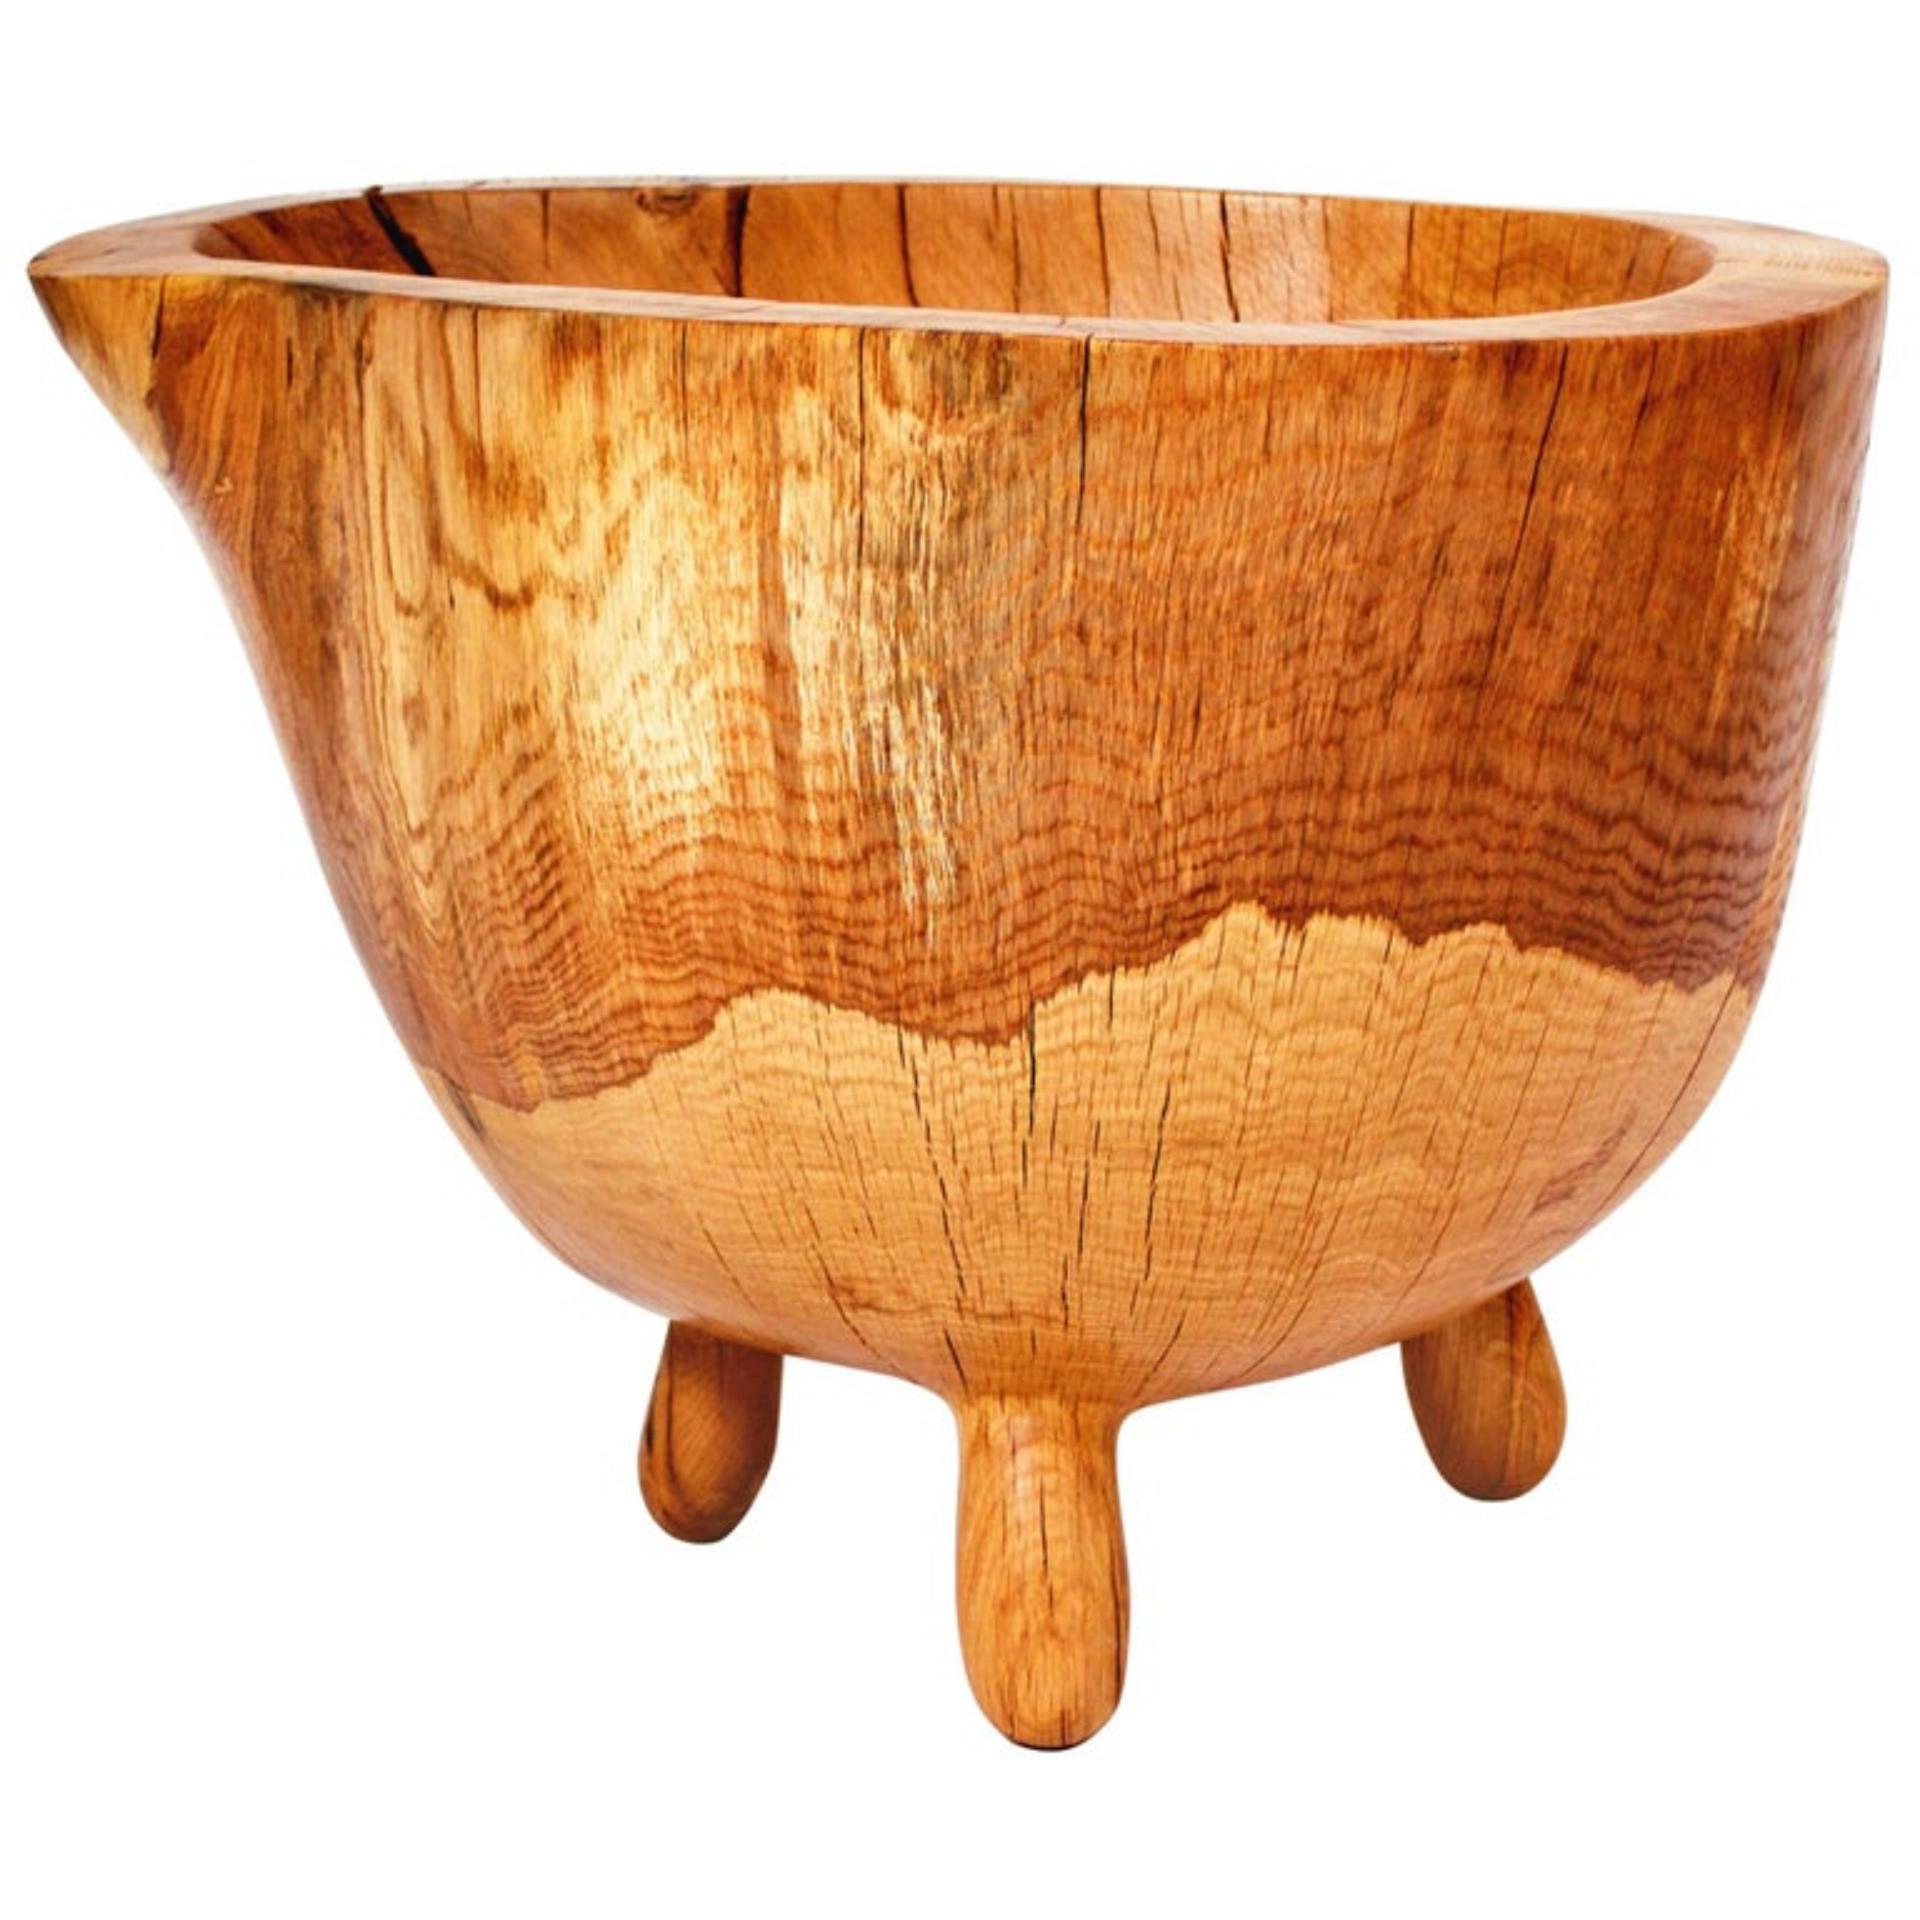 Unique Signed Bowl by Jörg Pietschmann
Bowl · Oak 
H 51 x W 74 x D 65 cm
Large bowl carved of oak heartwood. Polished oil finish

In Pietschmann’s sculptures, trees that for centuries were part of a landscape and founded in primordial forces tell